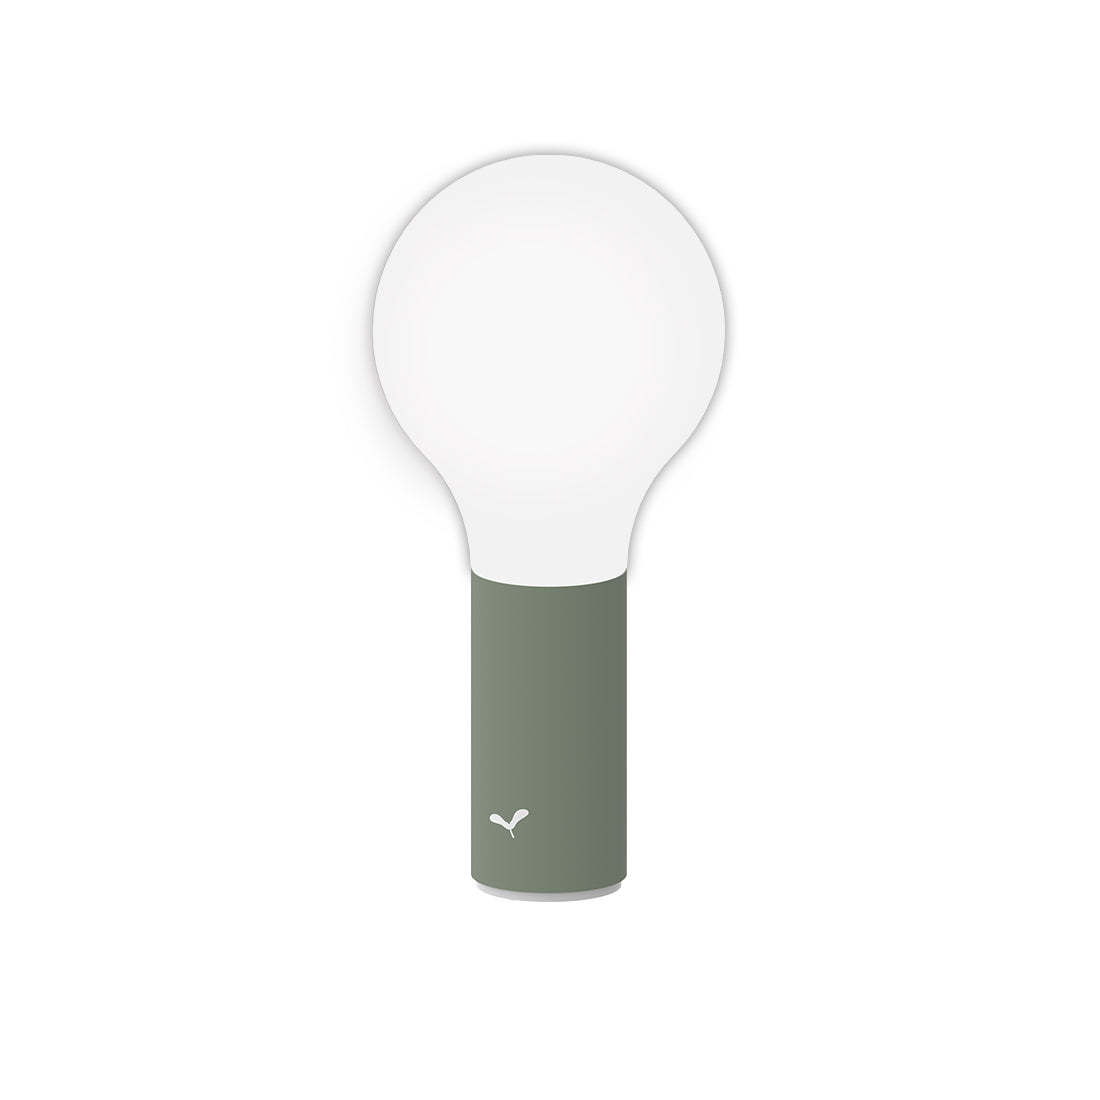 Fermob Aplô portable indoor and outdoor Lamp in Cactus in front of a white background.